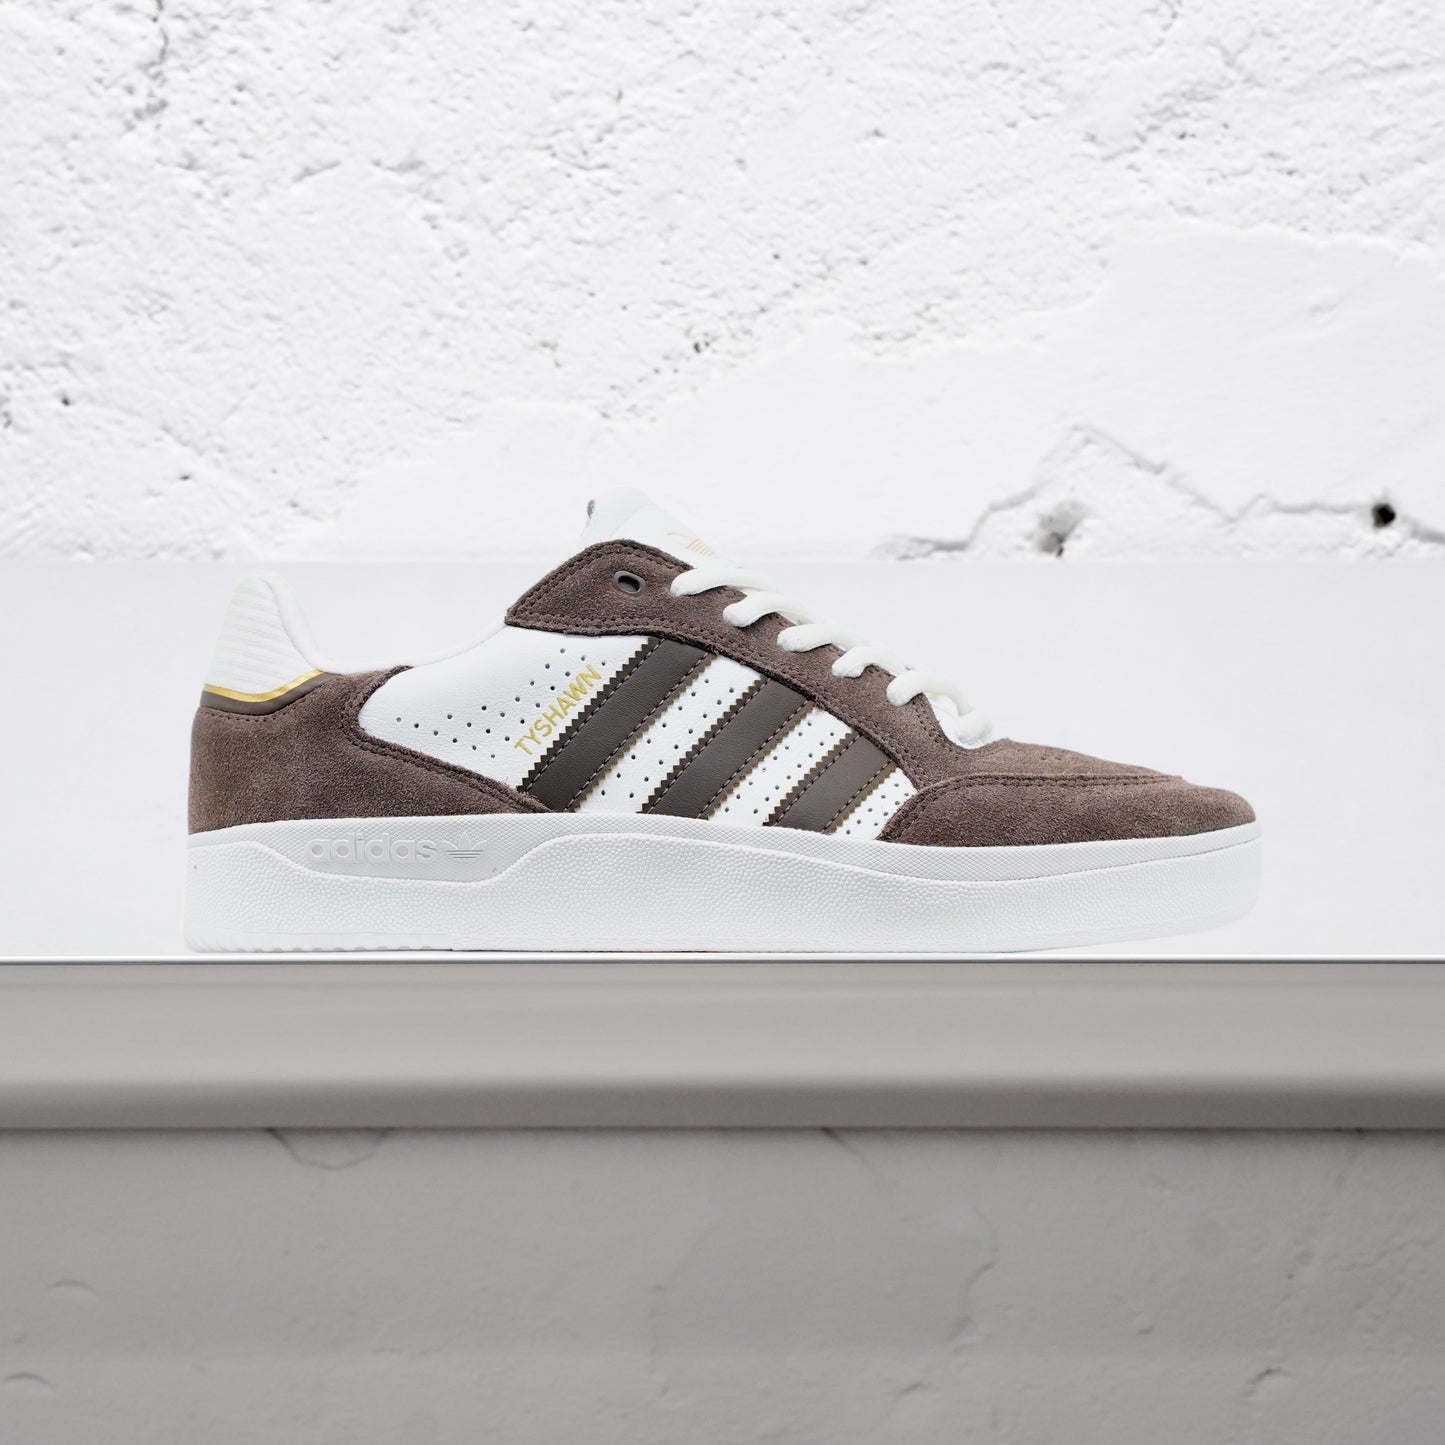 ADIDAS - Tyshawn Low Shoes - Brown/White/Gold